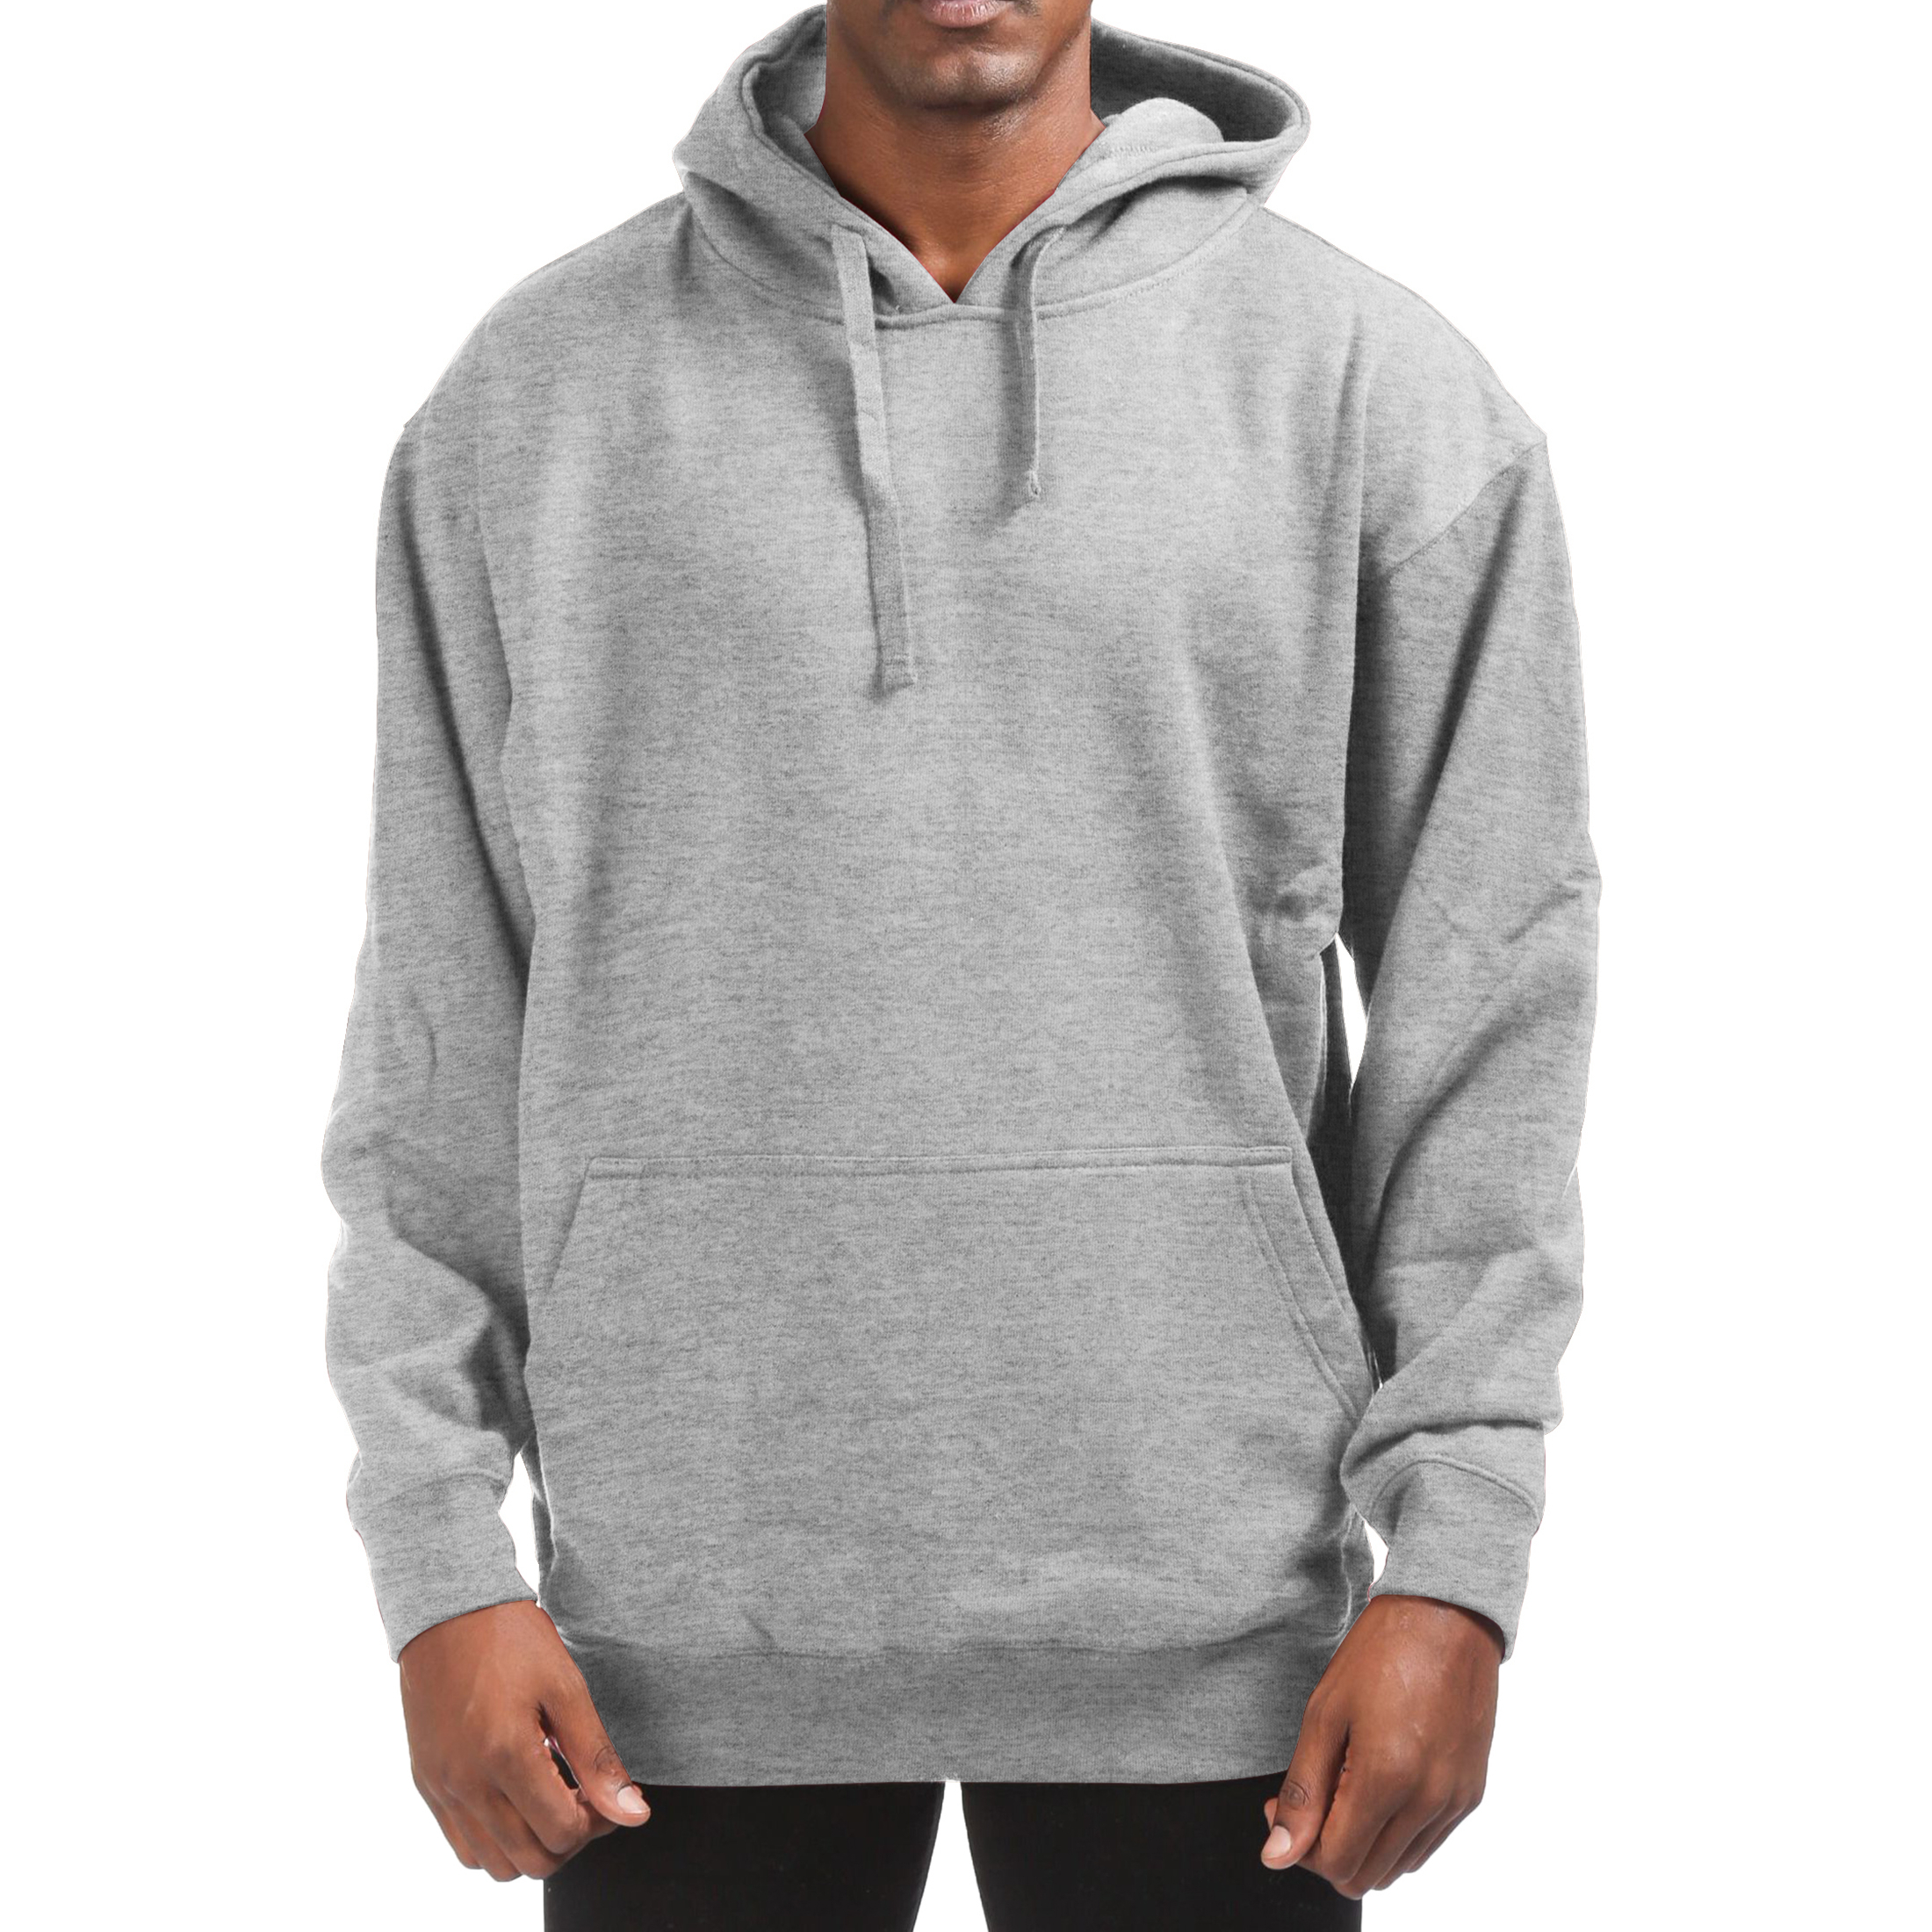 Men's Cotton-Blend Fleece Pullover Hoodie With Pocket (Big & Tall Sizes Available) - Gray, 3X-Large